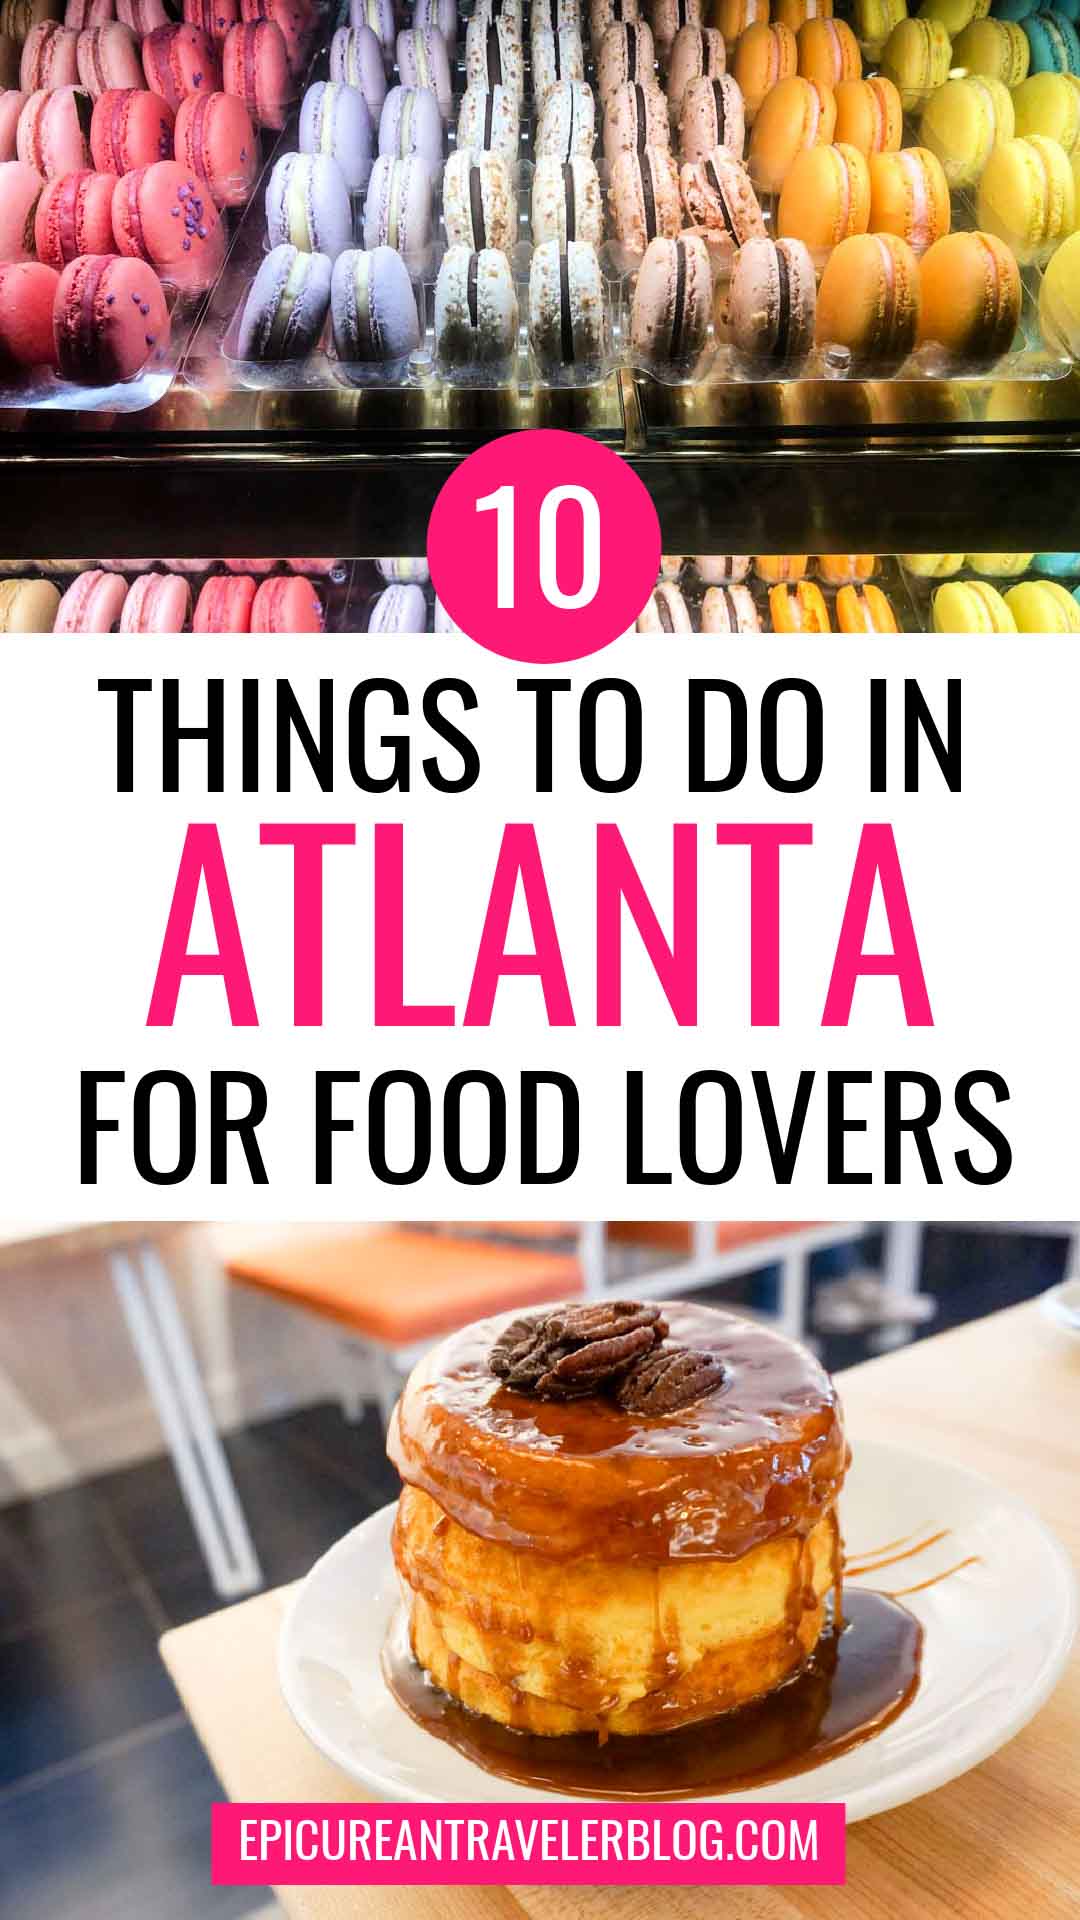 10 Things to Do in Atlanta for Foodies